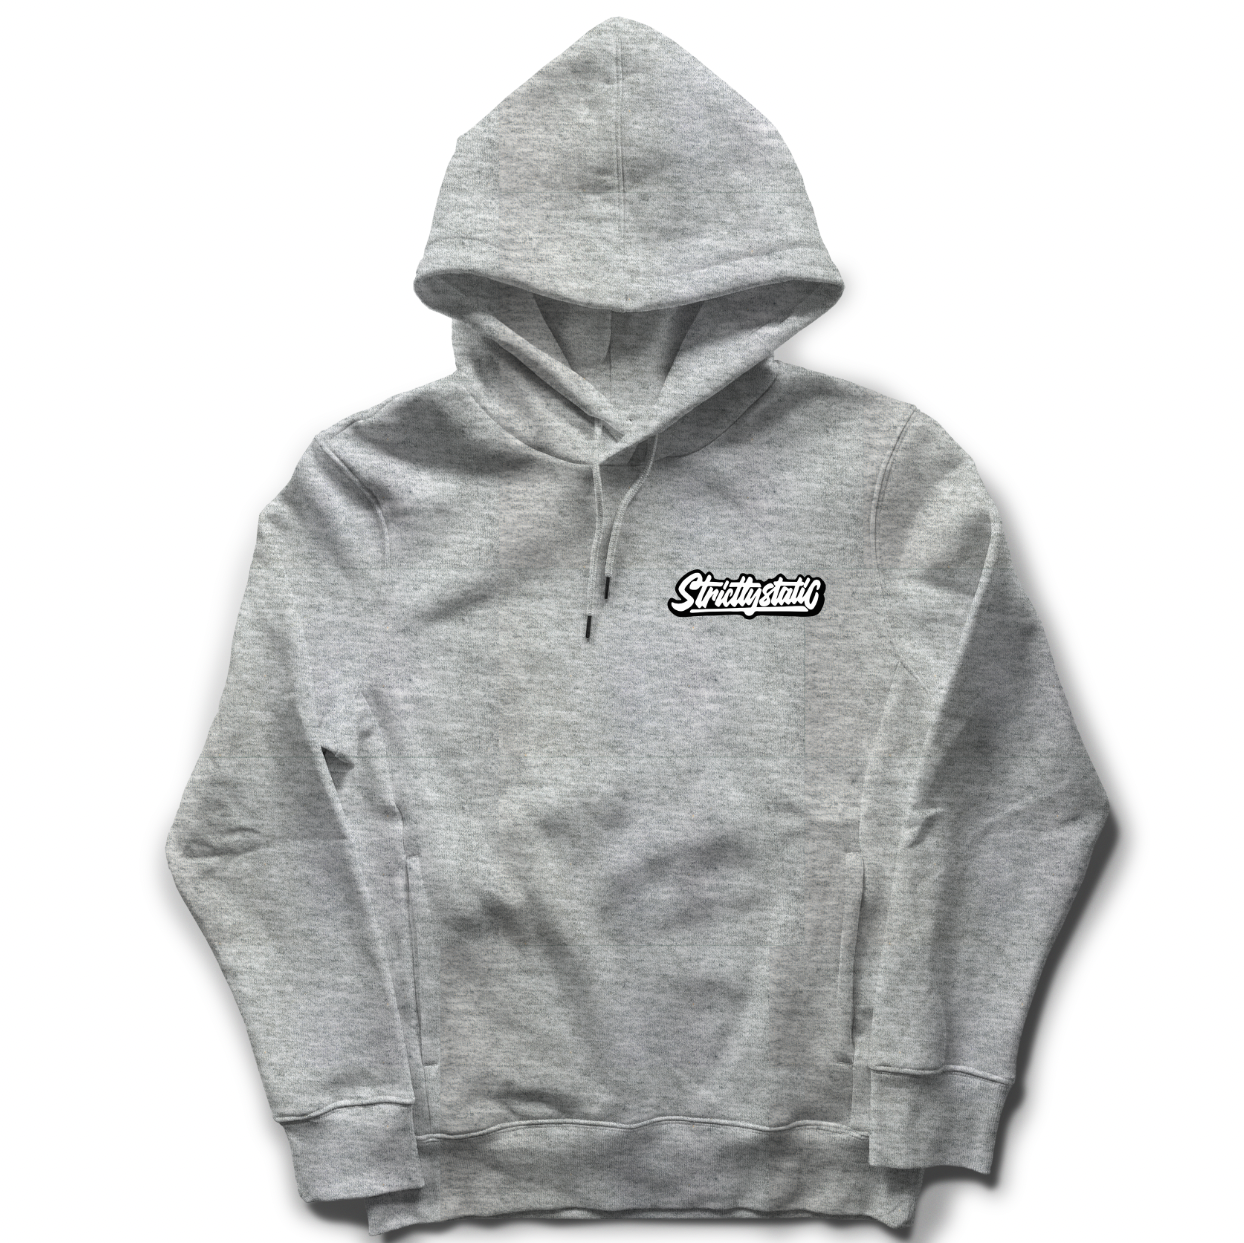 NEW HOODIES – Strictly Static